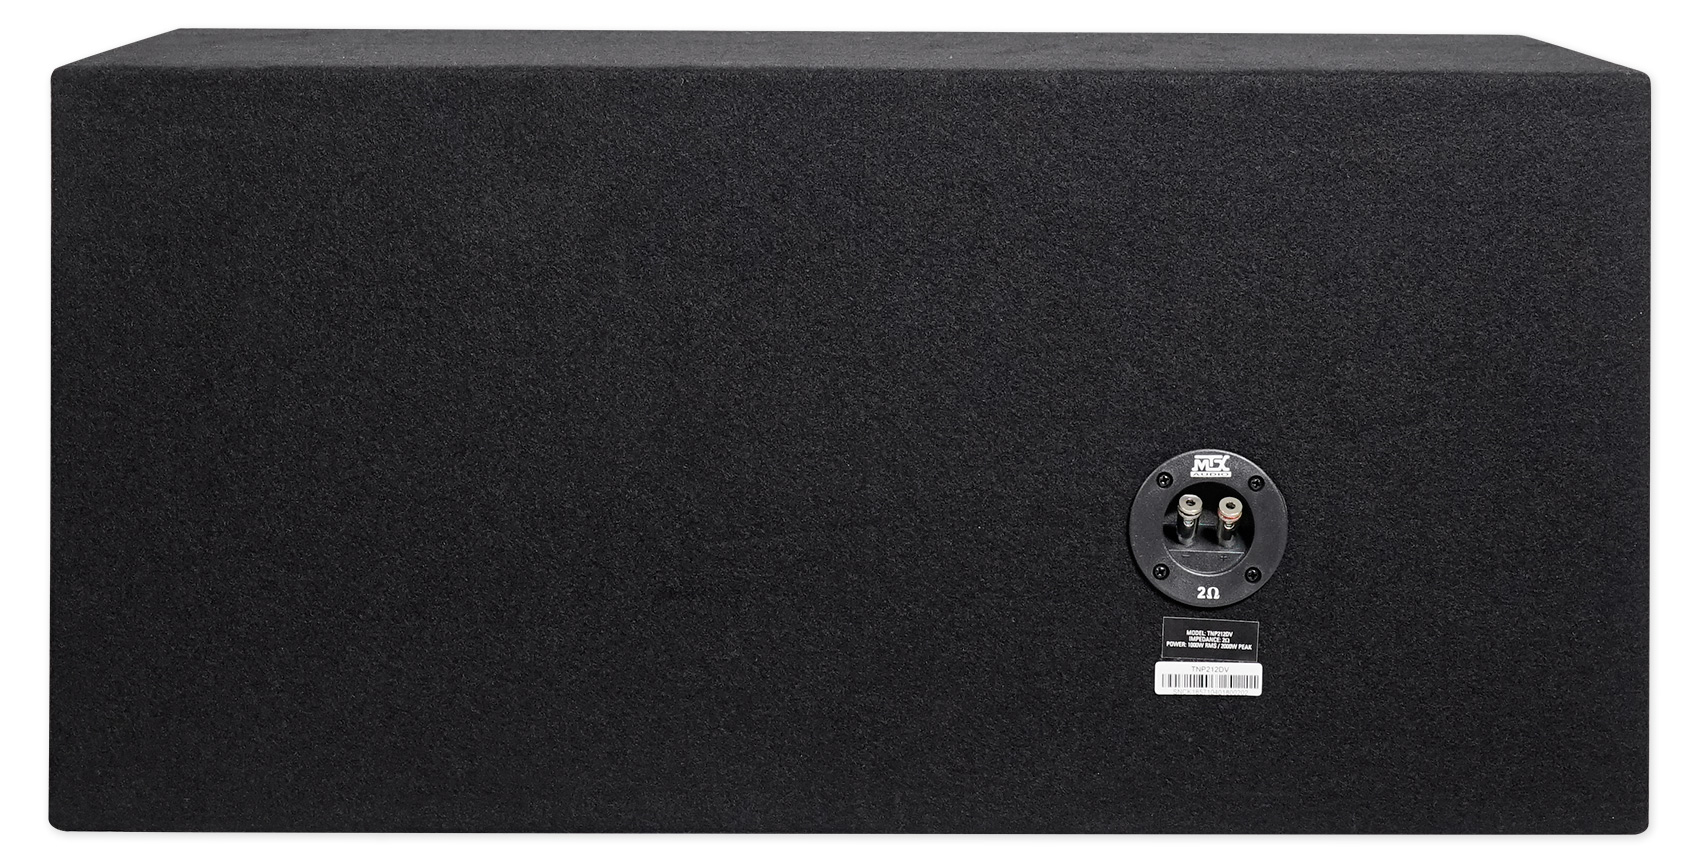 MTX TNP212DV 12in 2000W Dual Loaded Subwoofer Enclosure with Amplifier, New - image 4 of 10